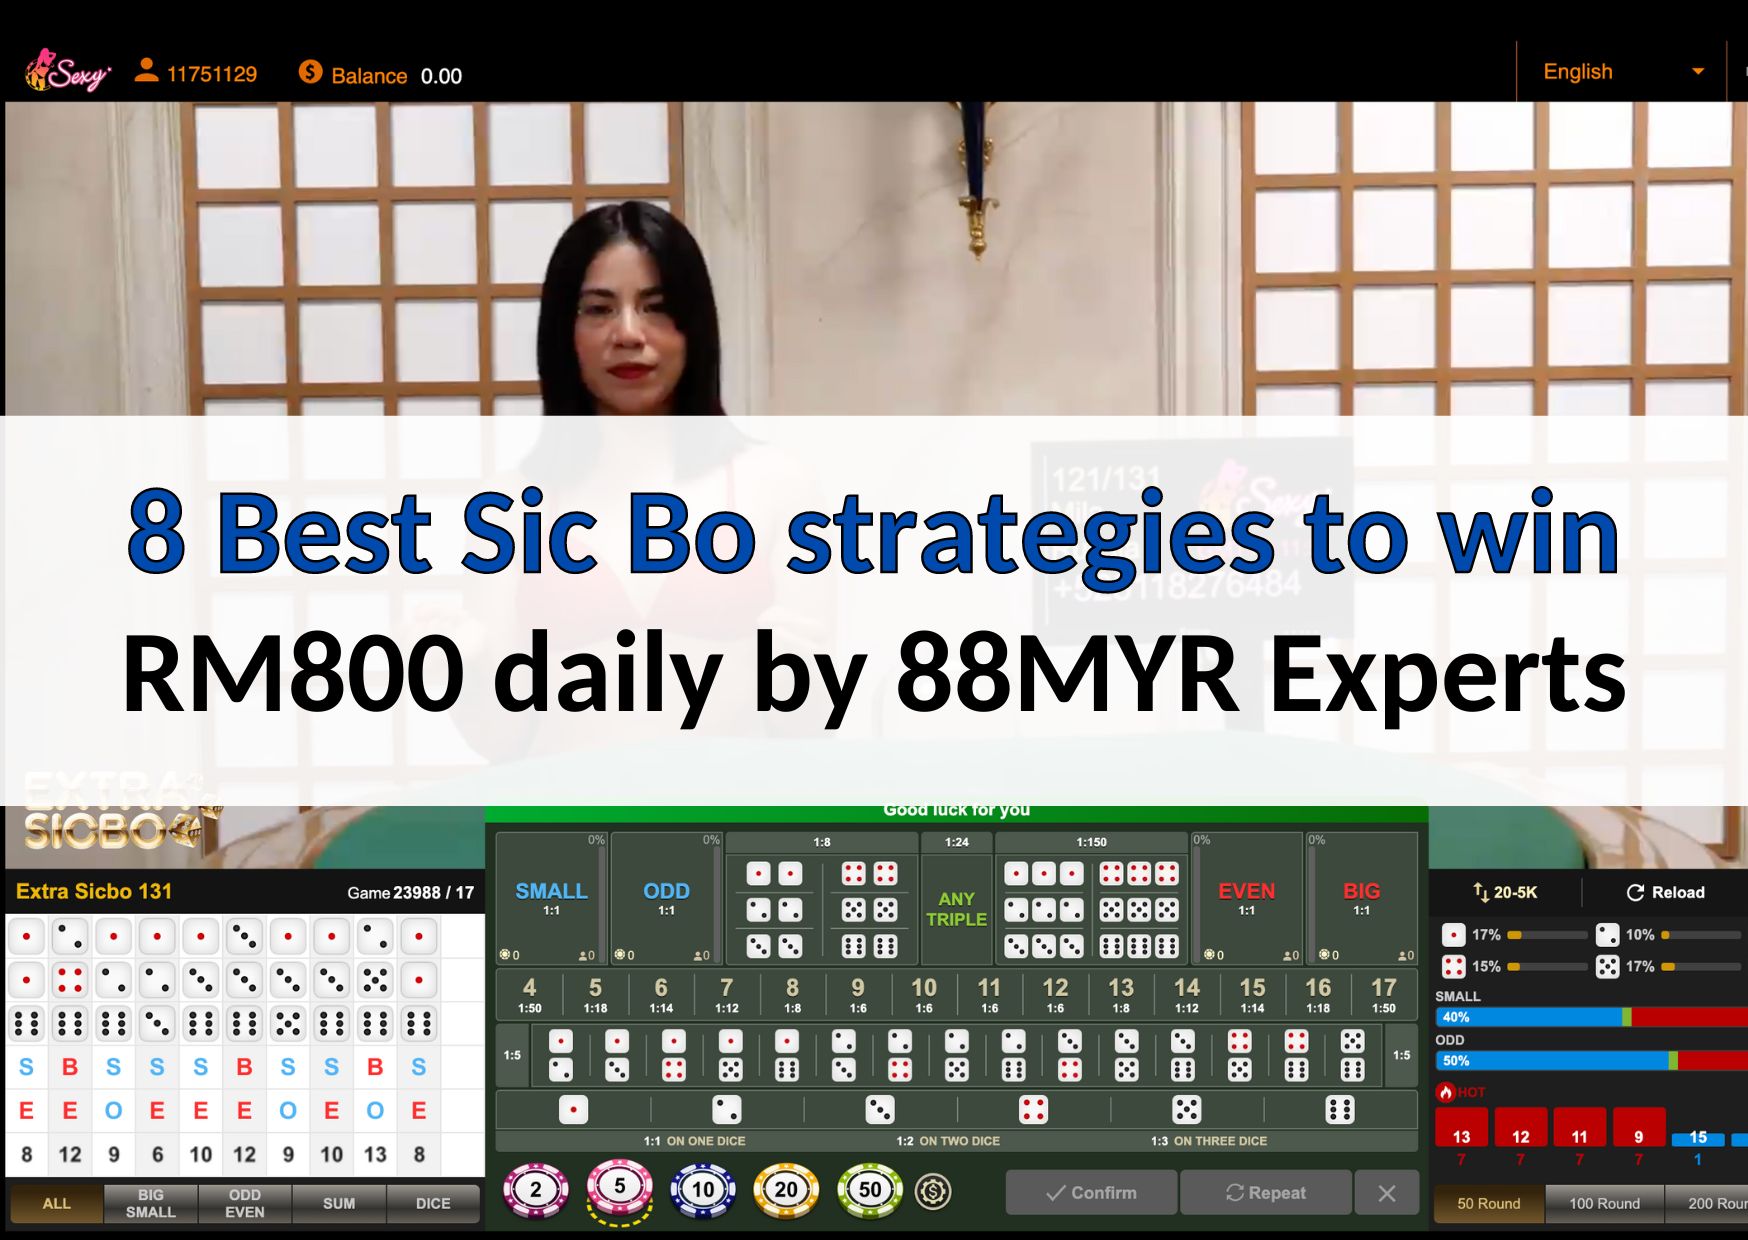 8 Best Sic Bo strategies to win RM800 daily by 88MYR Experts